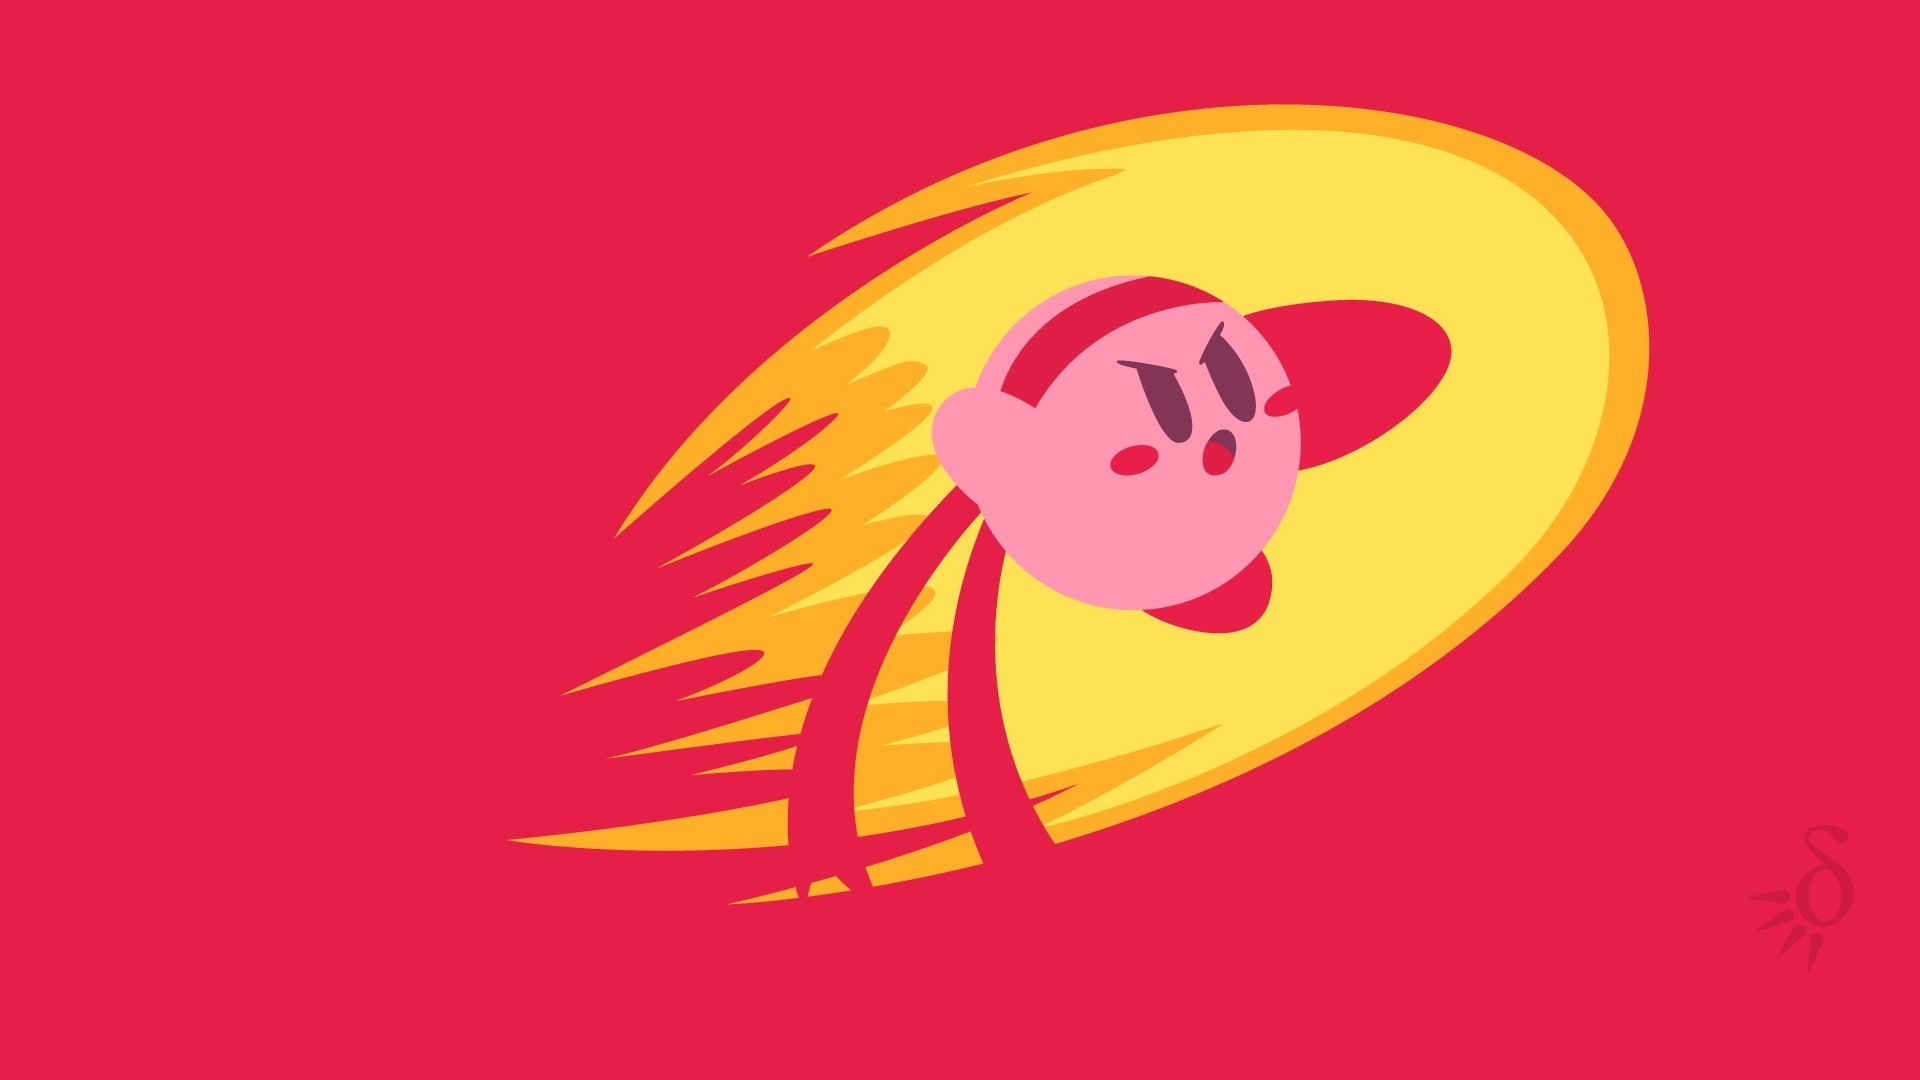 video games, Kirby, video game characters, video game art Gallery HD Wallpaper